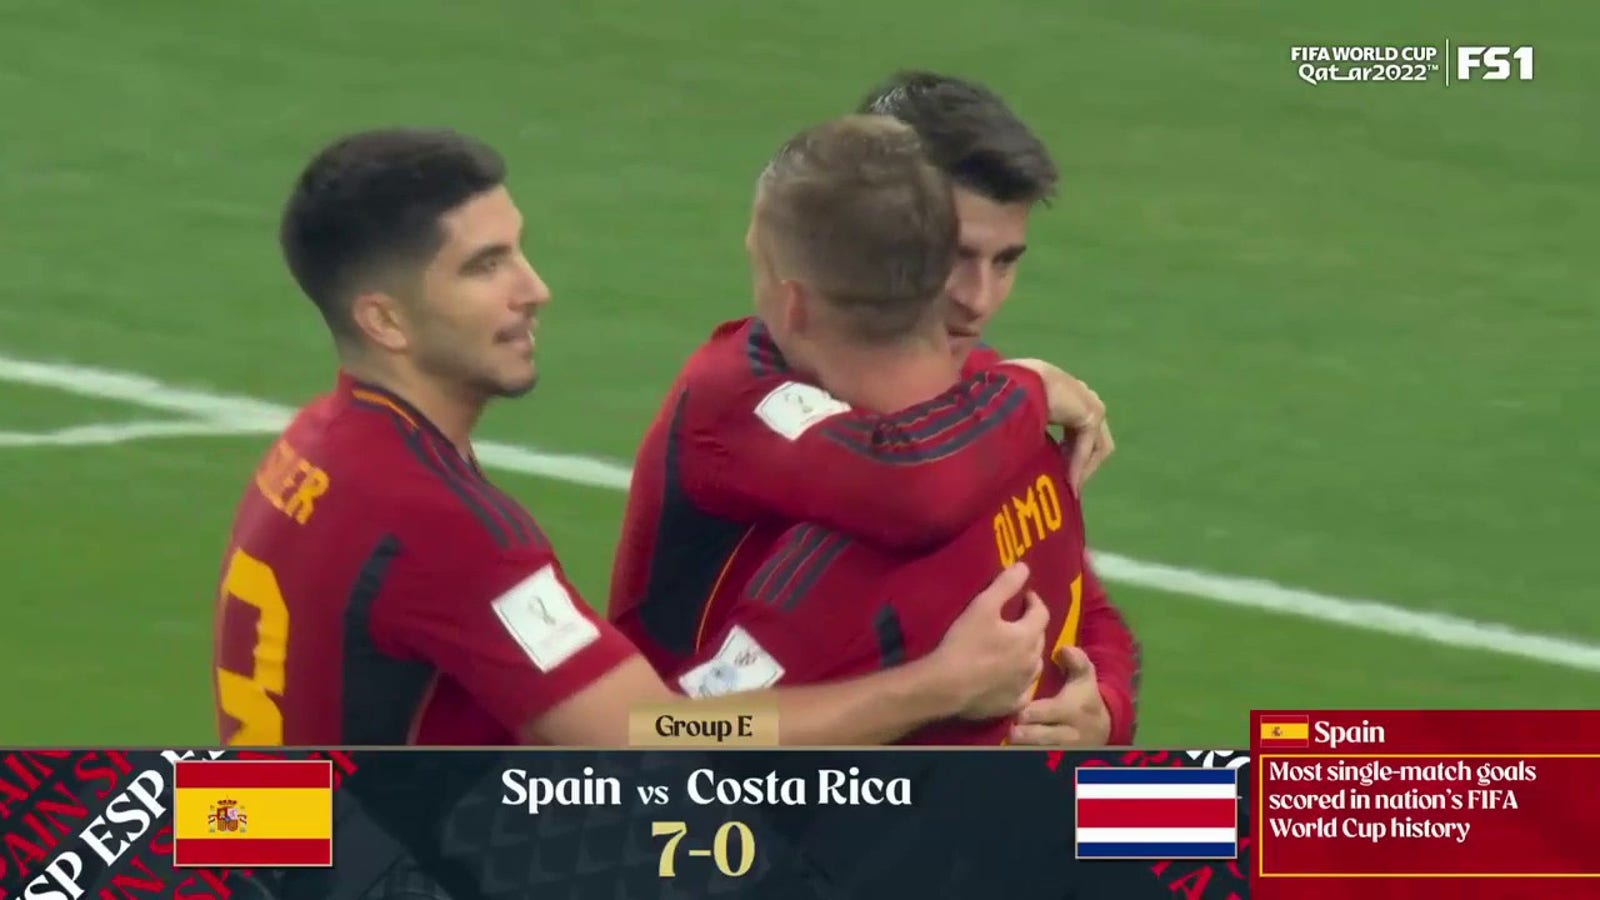 Spain vs. Costa Rica Recap: The young Spaniards make the biggest statement of the opening matches 